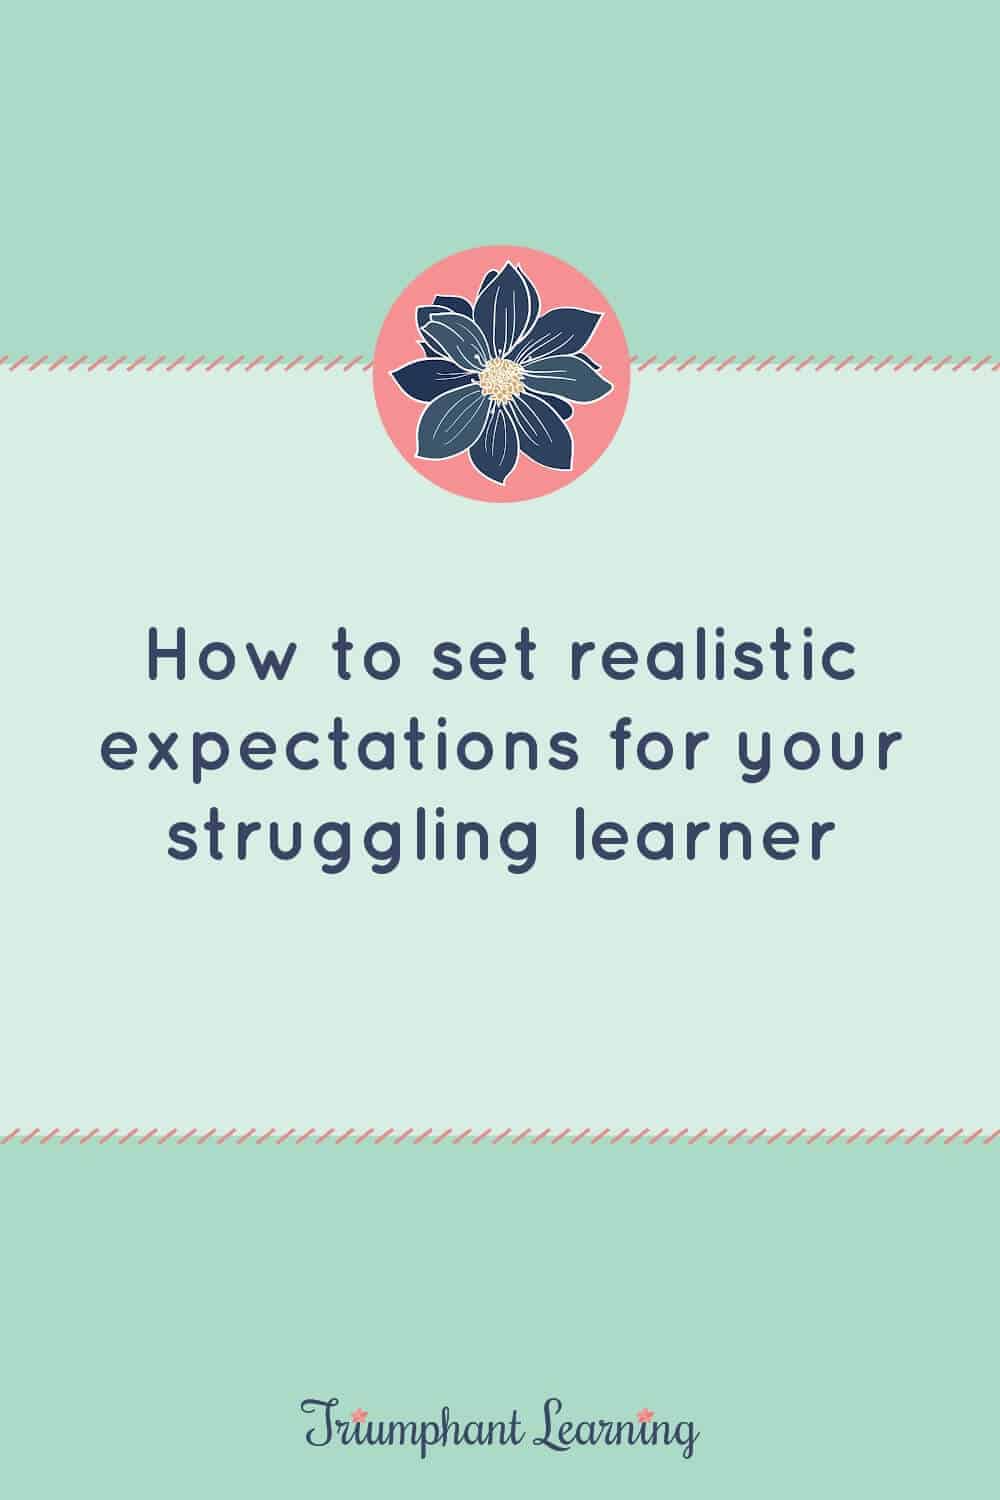 Many parents feel ill-equipped to teach their struggling learner. Learn the three questions you need to answer to help your struggling learner succeed. via @TriLearning